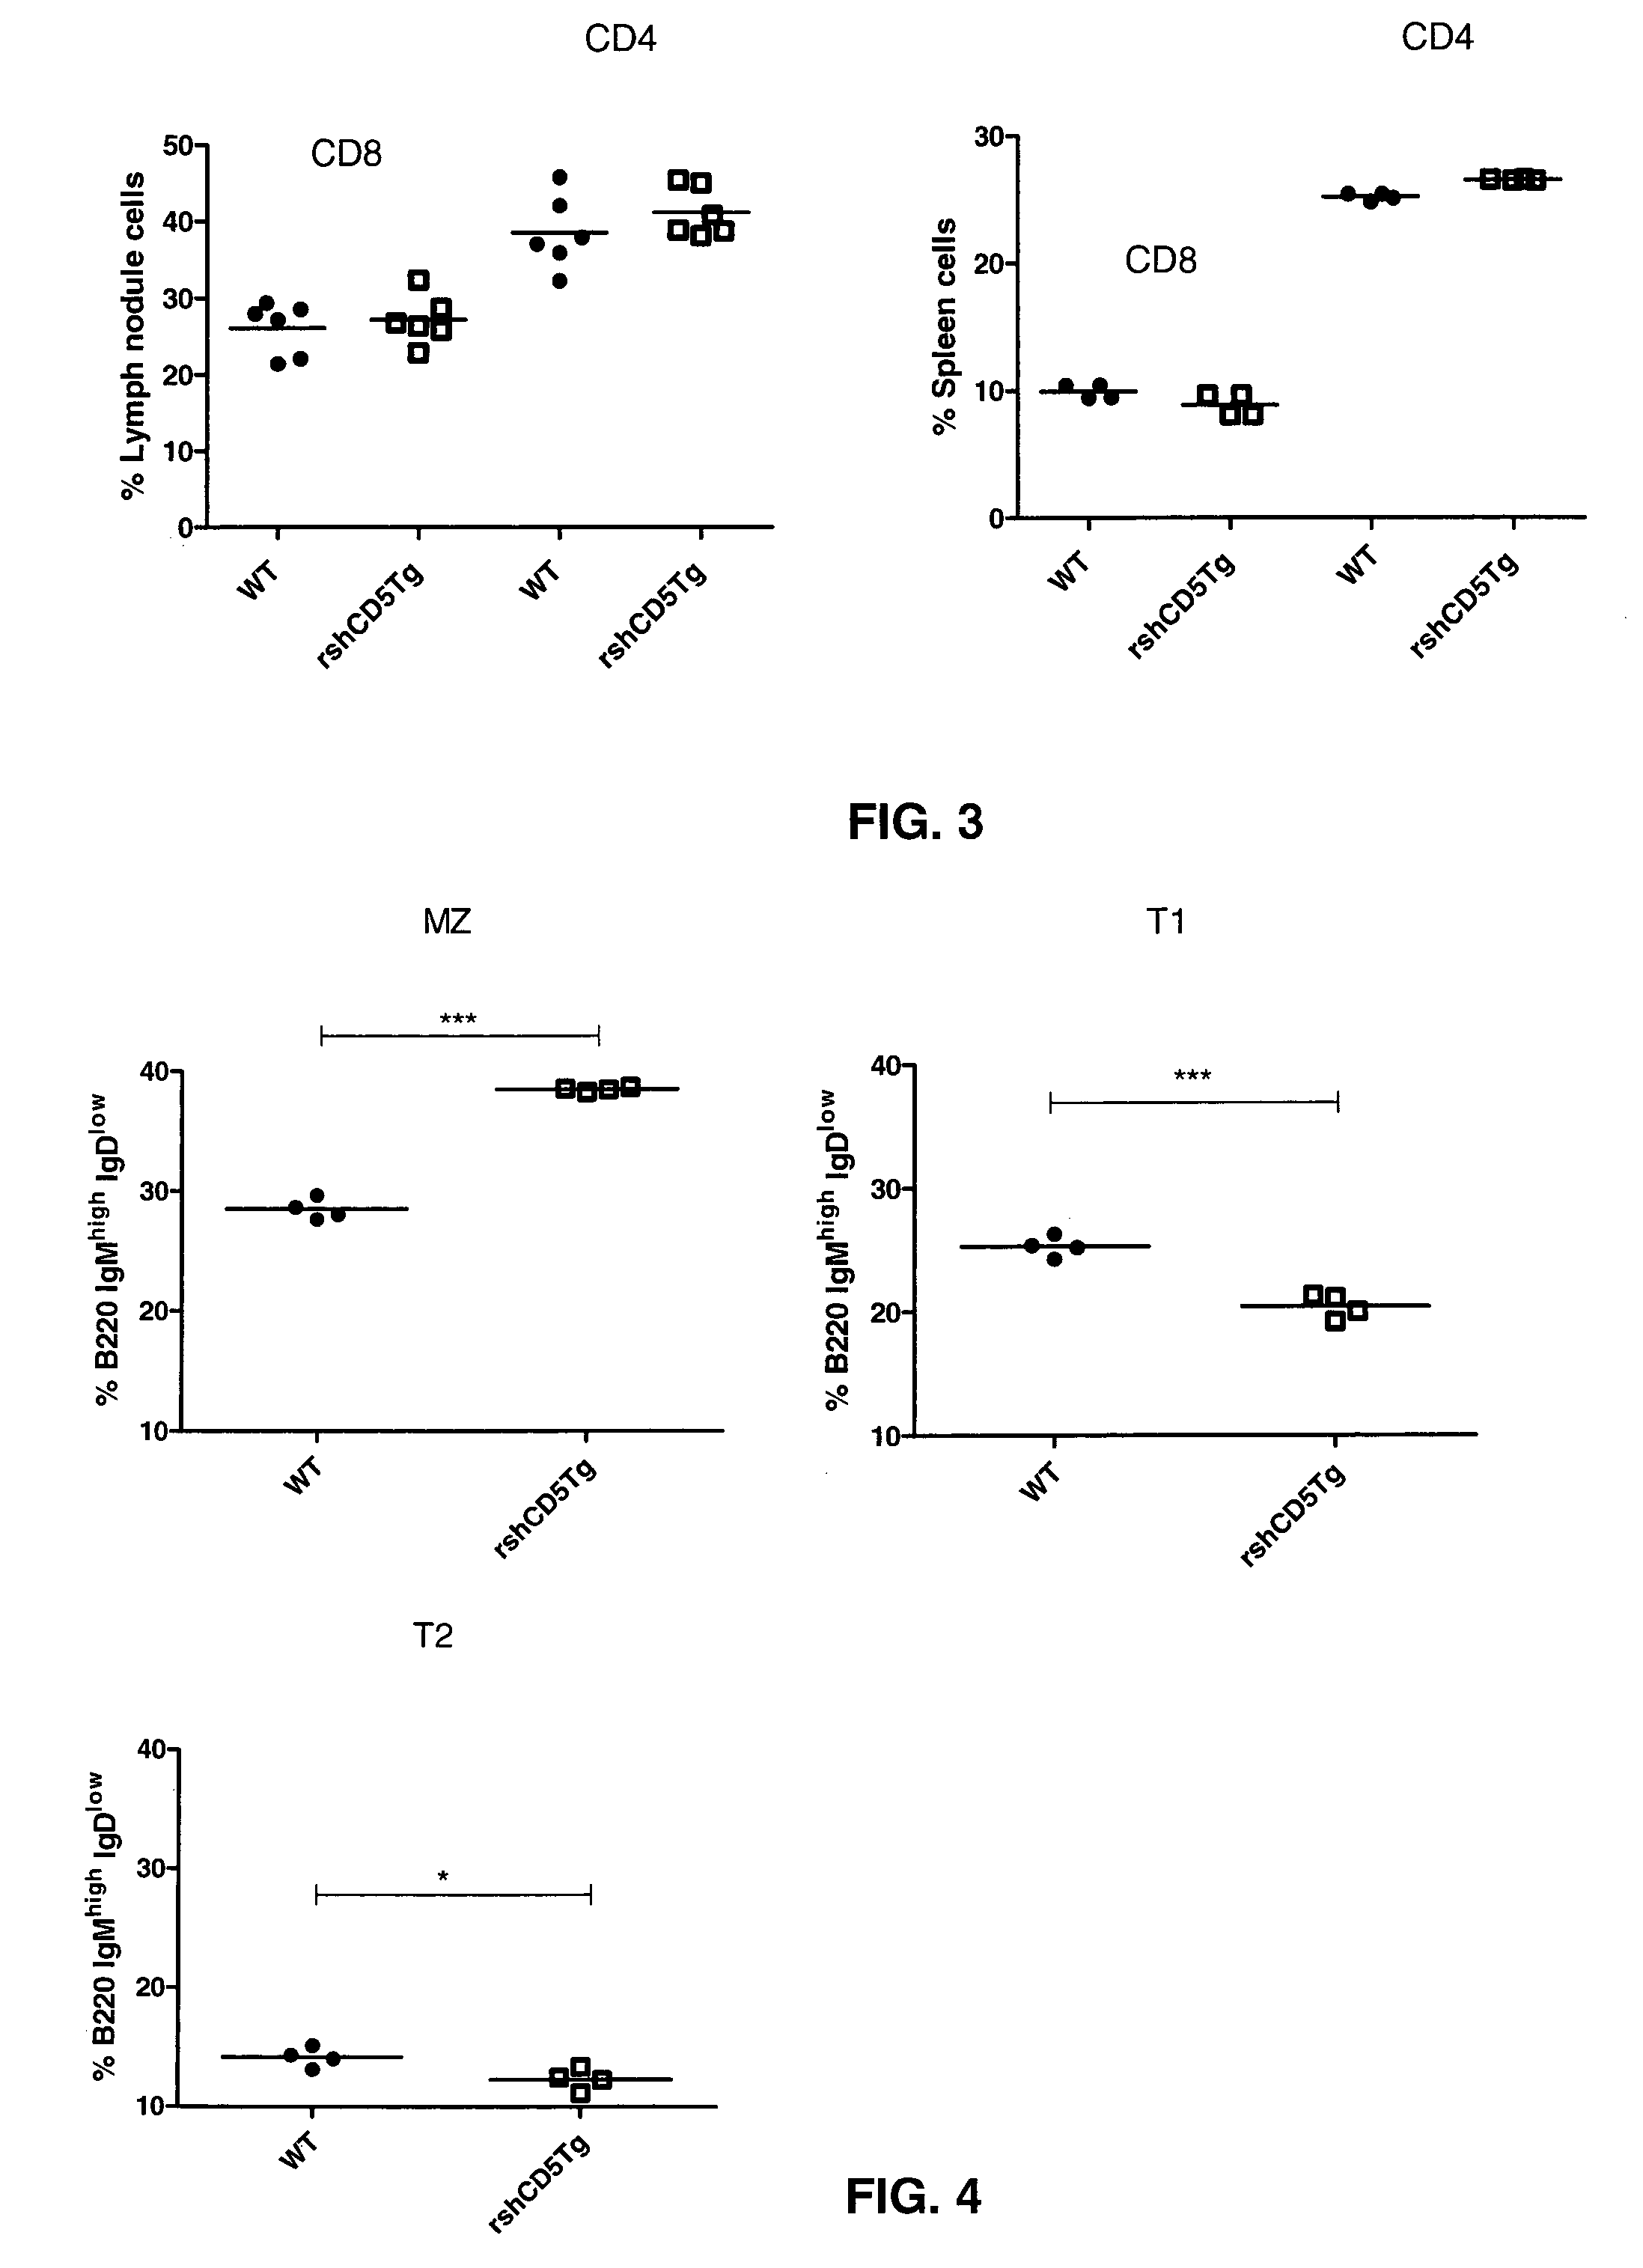 Soluble protein CD5 or CD6 for the treatment of cancer or tumor or for use as an adjuvant